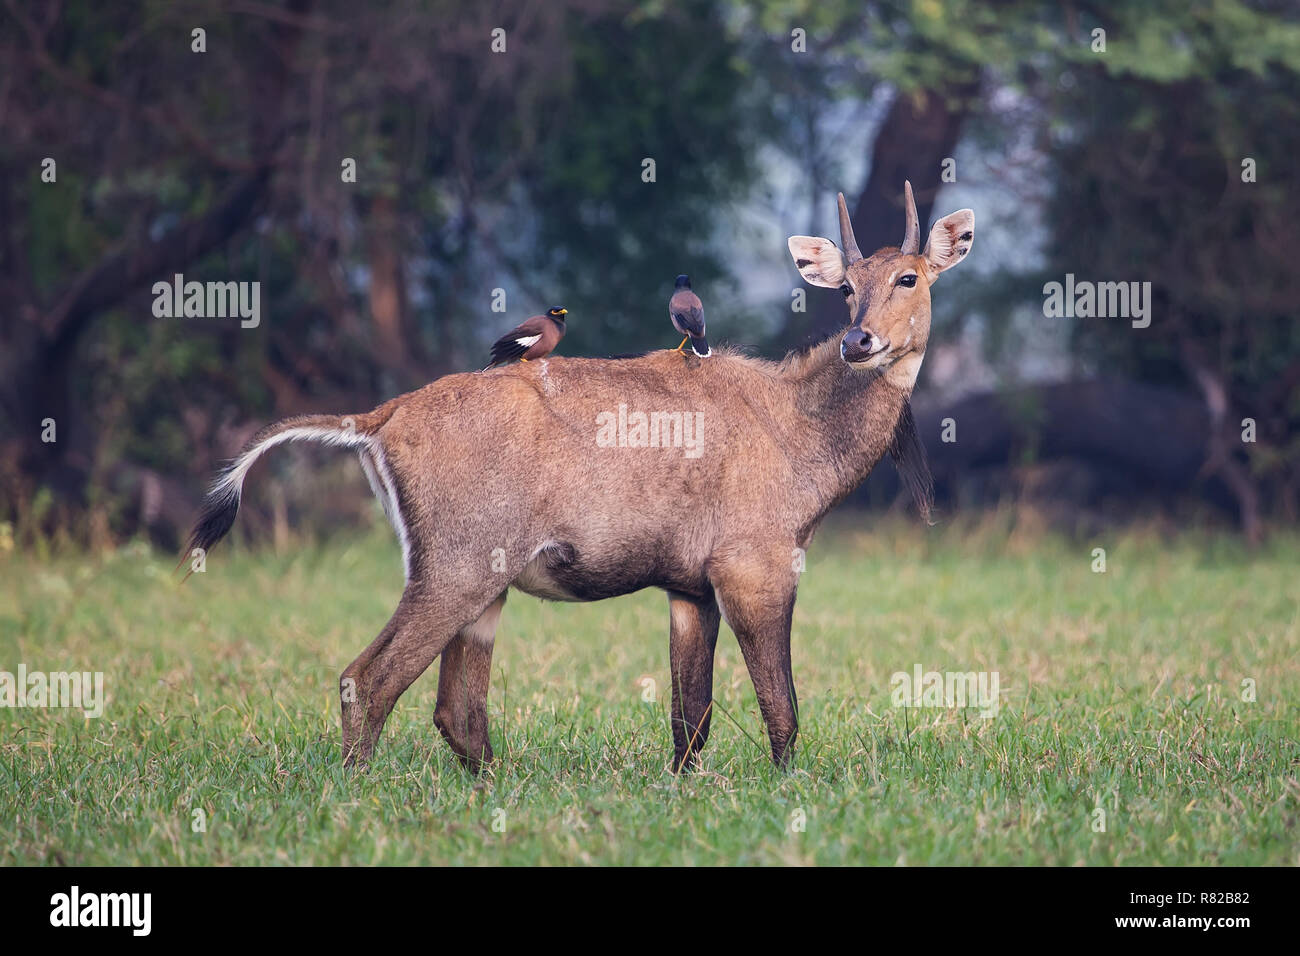 Male Nilgai with Brahminy mynas sitting on him in Keoladeo National Park, Bharatpur, India. Nilgai is the largest Asian antelope and is endemic to the Stock Photo